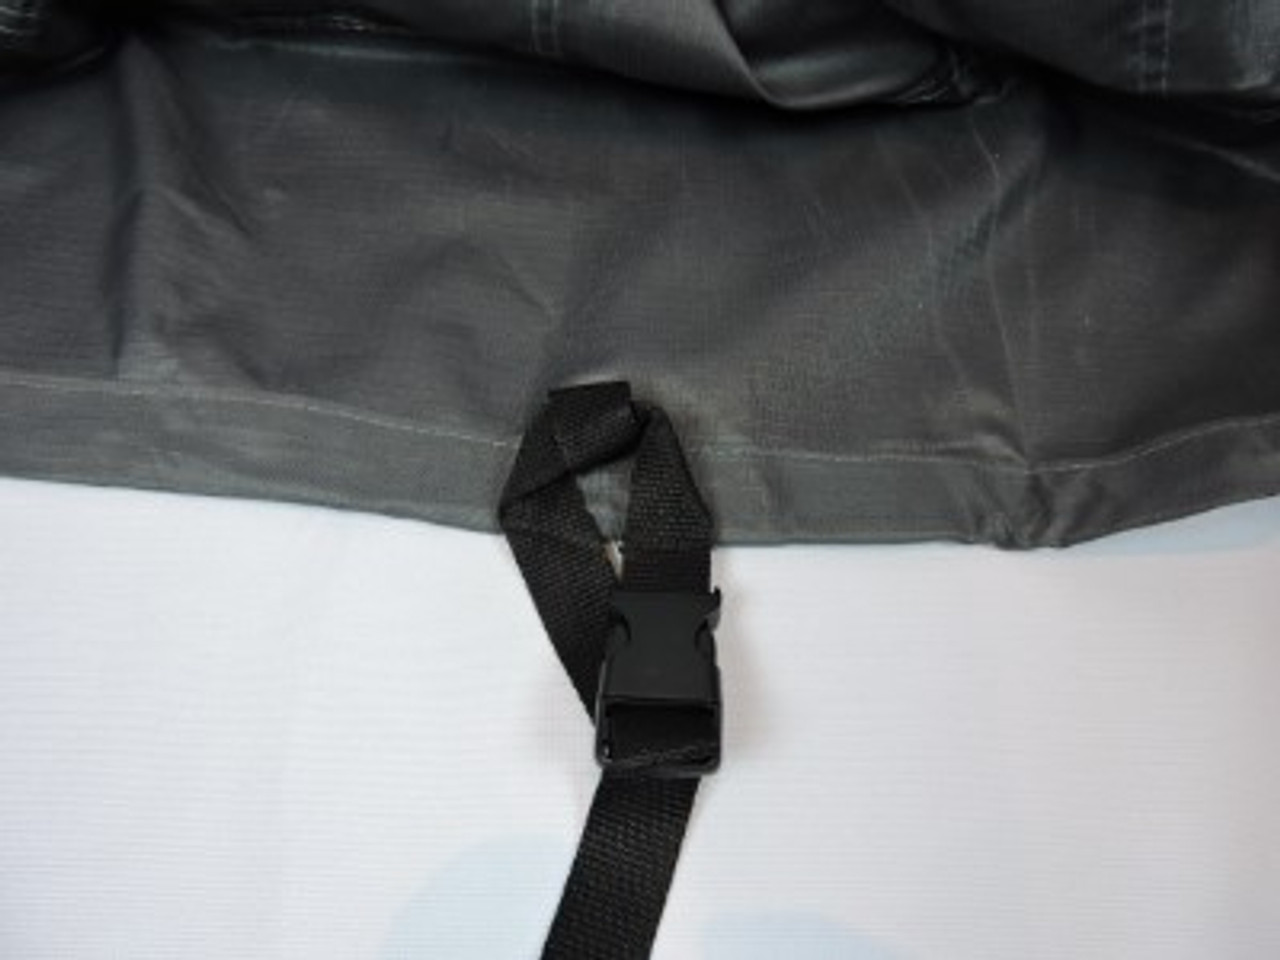 Avalon strap and buckle system for secure tie down